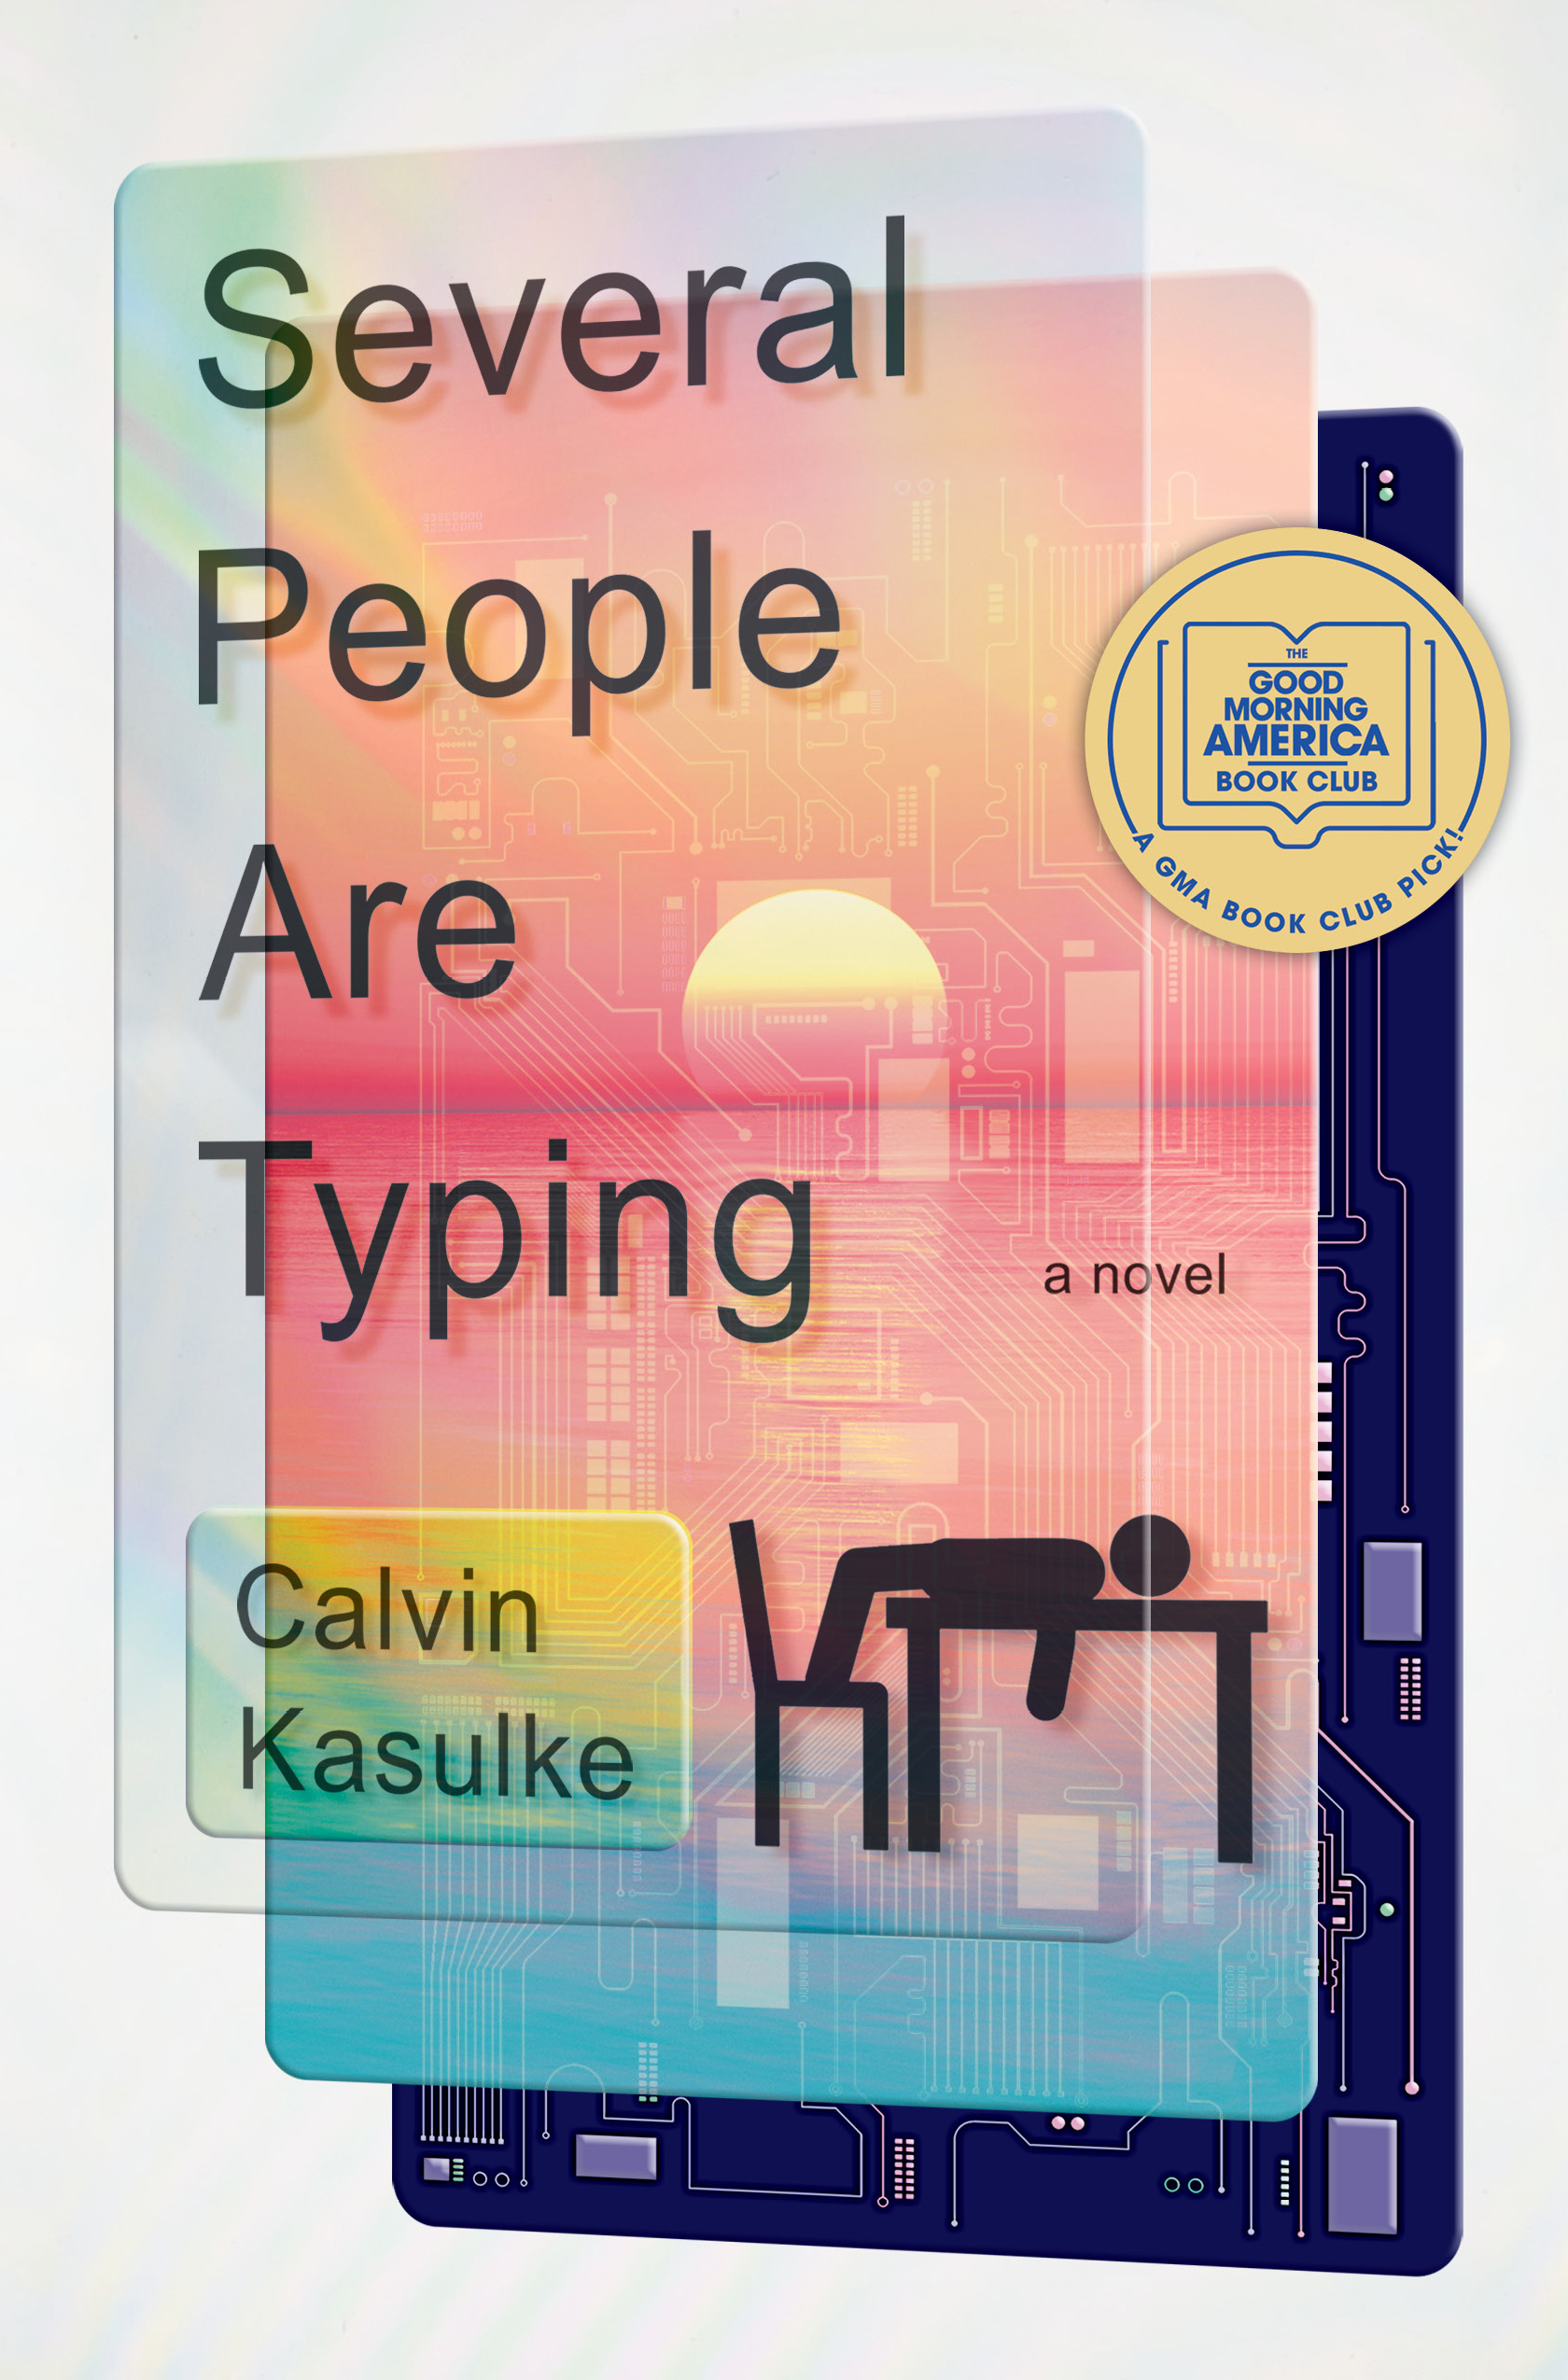 'Several People Are Typing' by Calvin Kasulke